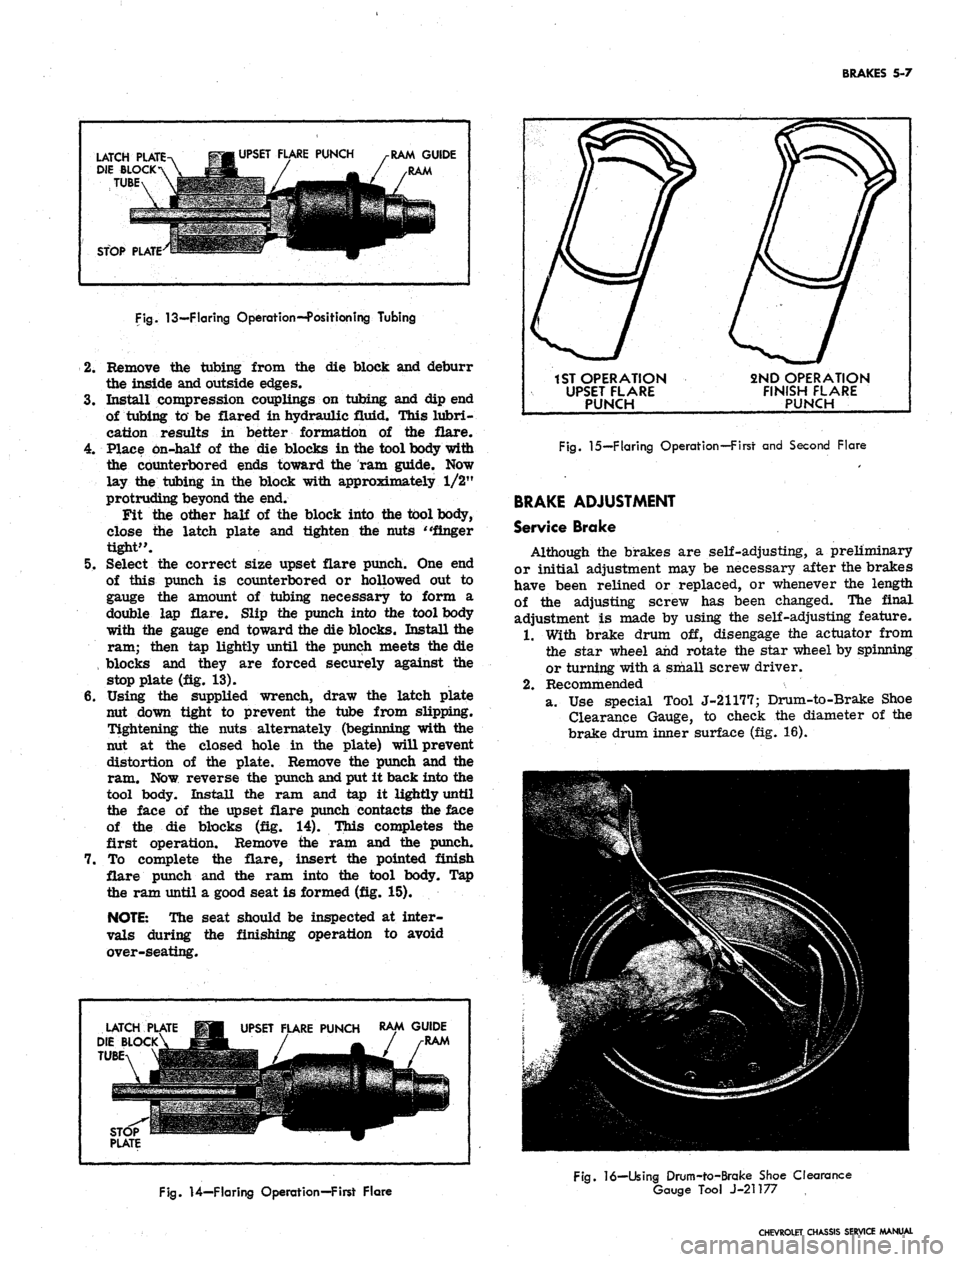 CHEVROLET CAMARO 1967 1.G Chassis Workshop Manual 
BRAKES 5-7

LATCH PLATE

DIE BLOCK

TUBE 
UPSET FLARE PUNCH

RAM GUIDE

STOP PLATE

Fig.
 13—Flaring Operation--Position ing Tubing

2.
 Remove the tubing from the die block and deburr

the inside 